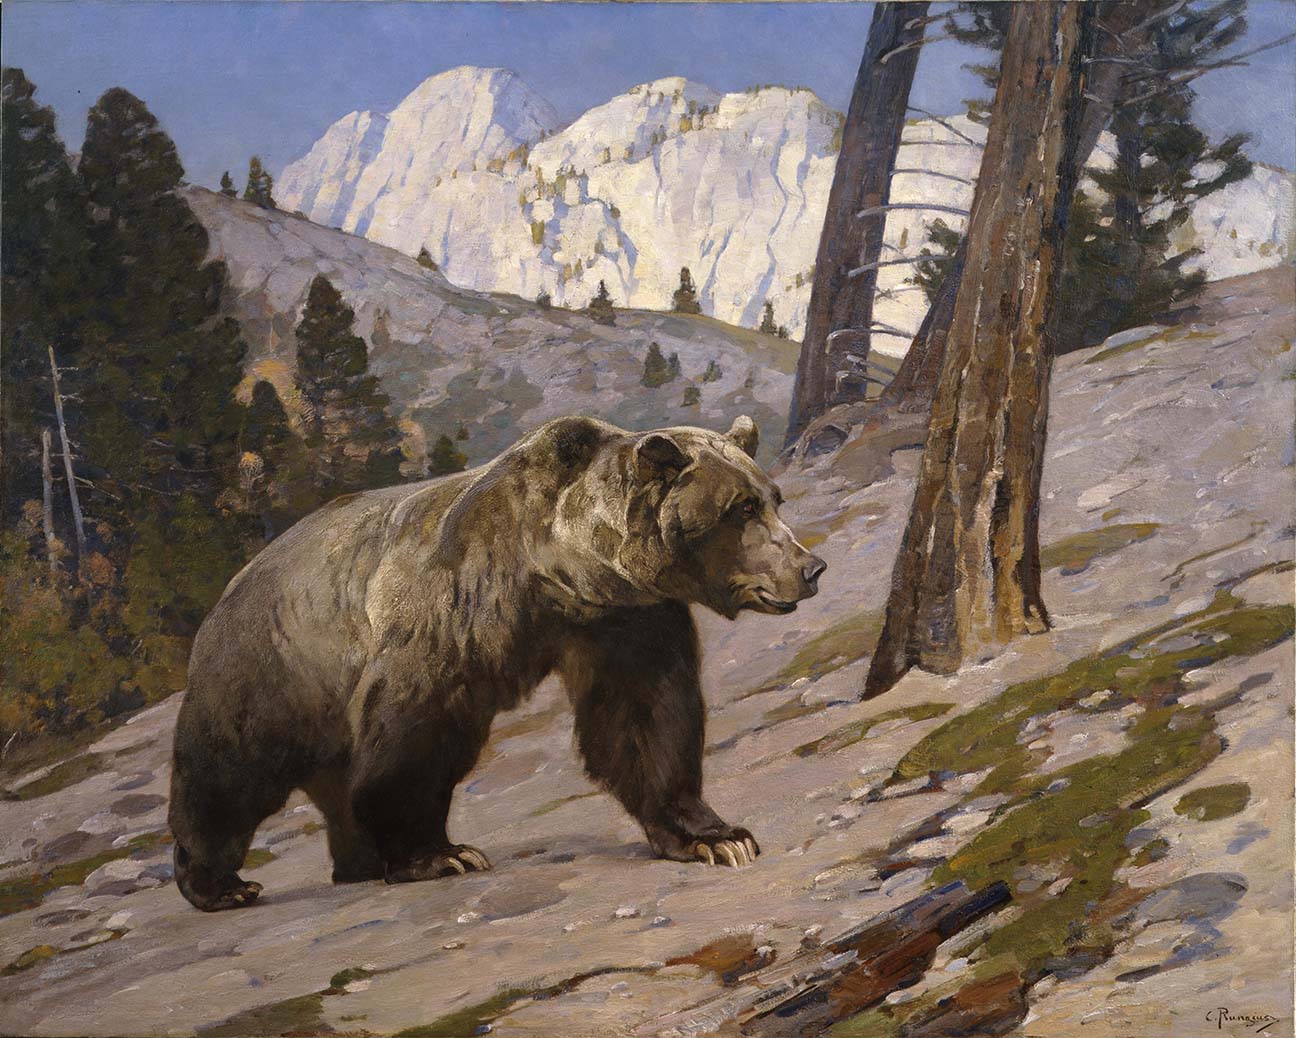 The grizzly bear in a western landscape is a favorite subject of artists past and present. Carl Rungius (1869-1959), "Silver Tip Grizzly Bear - Rocky Mountains, Alberta," ca. 1923, oil on canvas, 60 x 75.125 inches. Gift of Jackson Hole Preserve, Inc. 16.93.4